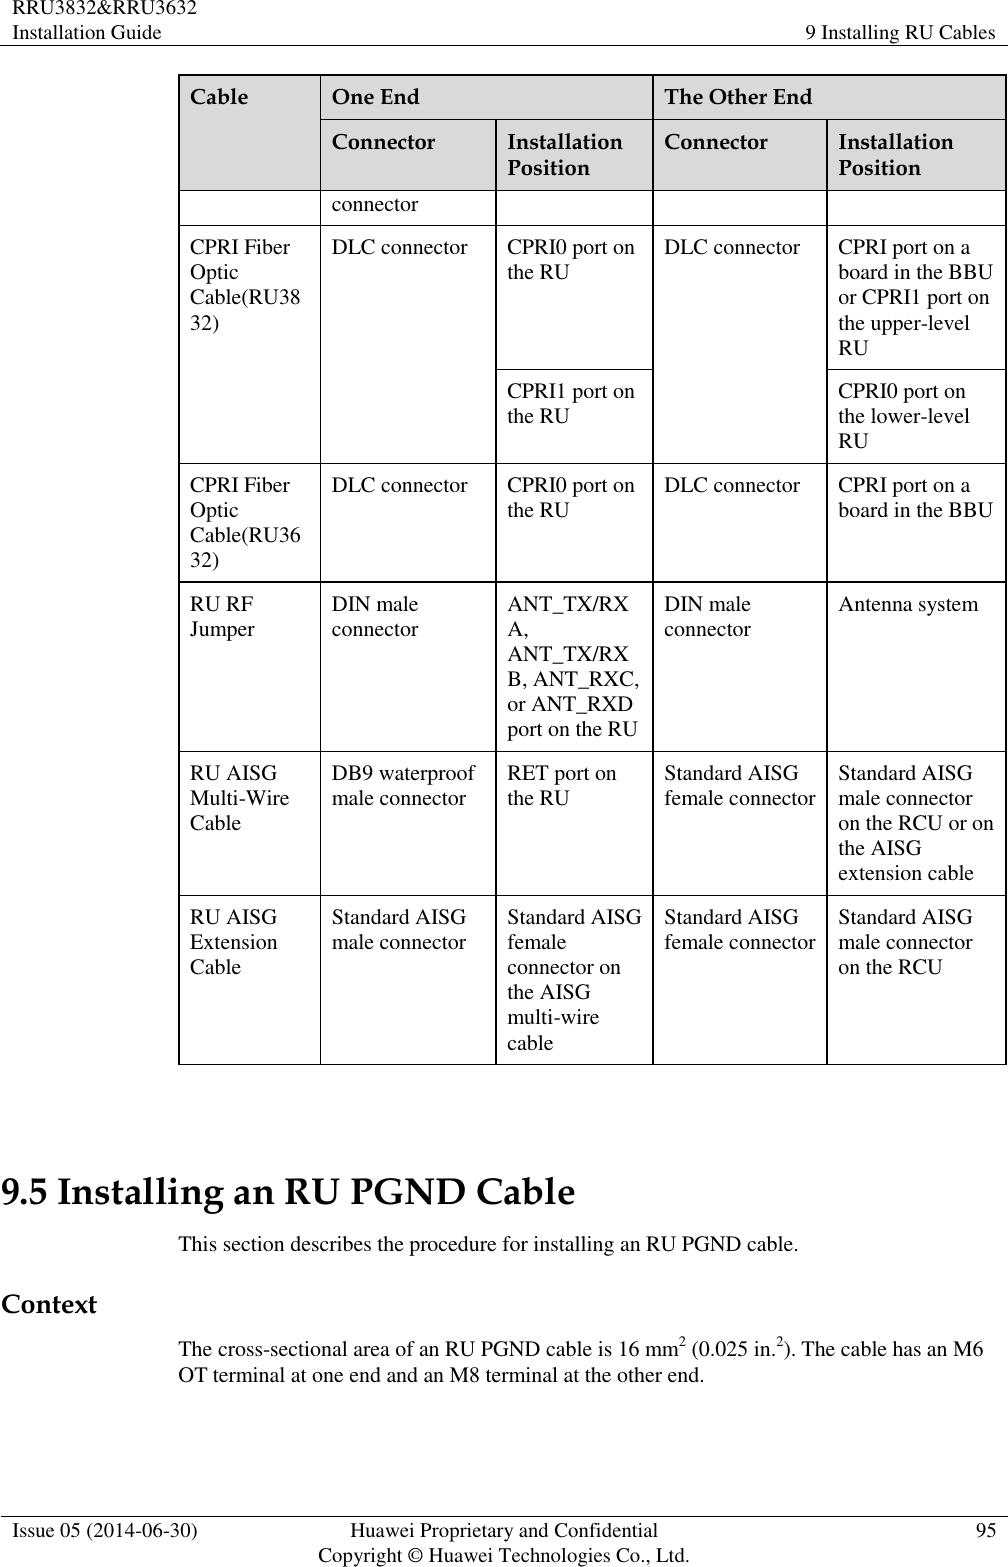 RRU3832&amp;RRU3632 Installation Guide 9 Installing RU Cables  Issue 05 (2014-06-30) Huawei Proprietary and Confidential                                     Copyright © Huawei Technologies Co., Ltd. 95  Cable One End The Other End Connector Installation Position Connector Installation Position connector CPRI Fiber Optic Cable(RU3832) DLC connector CPRI0 port on the RU DLC connector CPRI port on a board in the BBU or CPRI1 port on the upper-level RU CPRI1 port on the RU CPRI0 port on the lower-level RU CPRI Fiber Optic Cable(RU3632) DLC connector CPRI0 port on the RU DLC connector CPRI port on a board in the BBU RU RF Jumper DIN male connector ANT_TX/RXA, ANT_TX/RXB, ANT_RXC, or ANT_RXD port on the RU DIN male connector Antenna system RU AISG Multi-Wire Cable DB9 waterproof male connector RET port on the RU Standard AISG female connector Standard AISG male connector on the RCU or on the AISG extension cable RU AISG Extension Cable Standard AISG male connector Standard AISG female connector on the AISG multi-wire cable Standard AISG female connector Standard AISG male connector on the RCU  9.5 Installing an RU PGND Cable This section describes the procedure for installing an RU PGND cable. Context The cross-sectional area of an RU PGND cable is 16 mm2 (0.025 in.2). The cable has an M6 OT terminal at one end and an M8 terminal at the other end. 